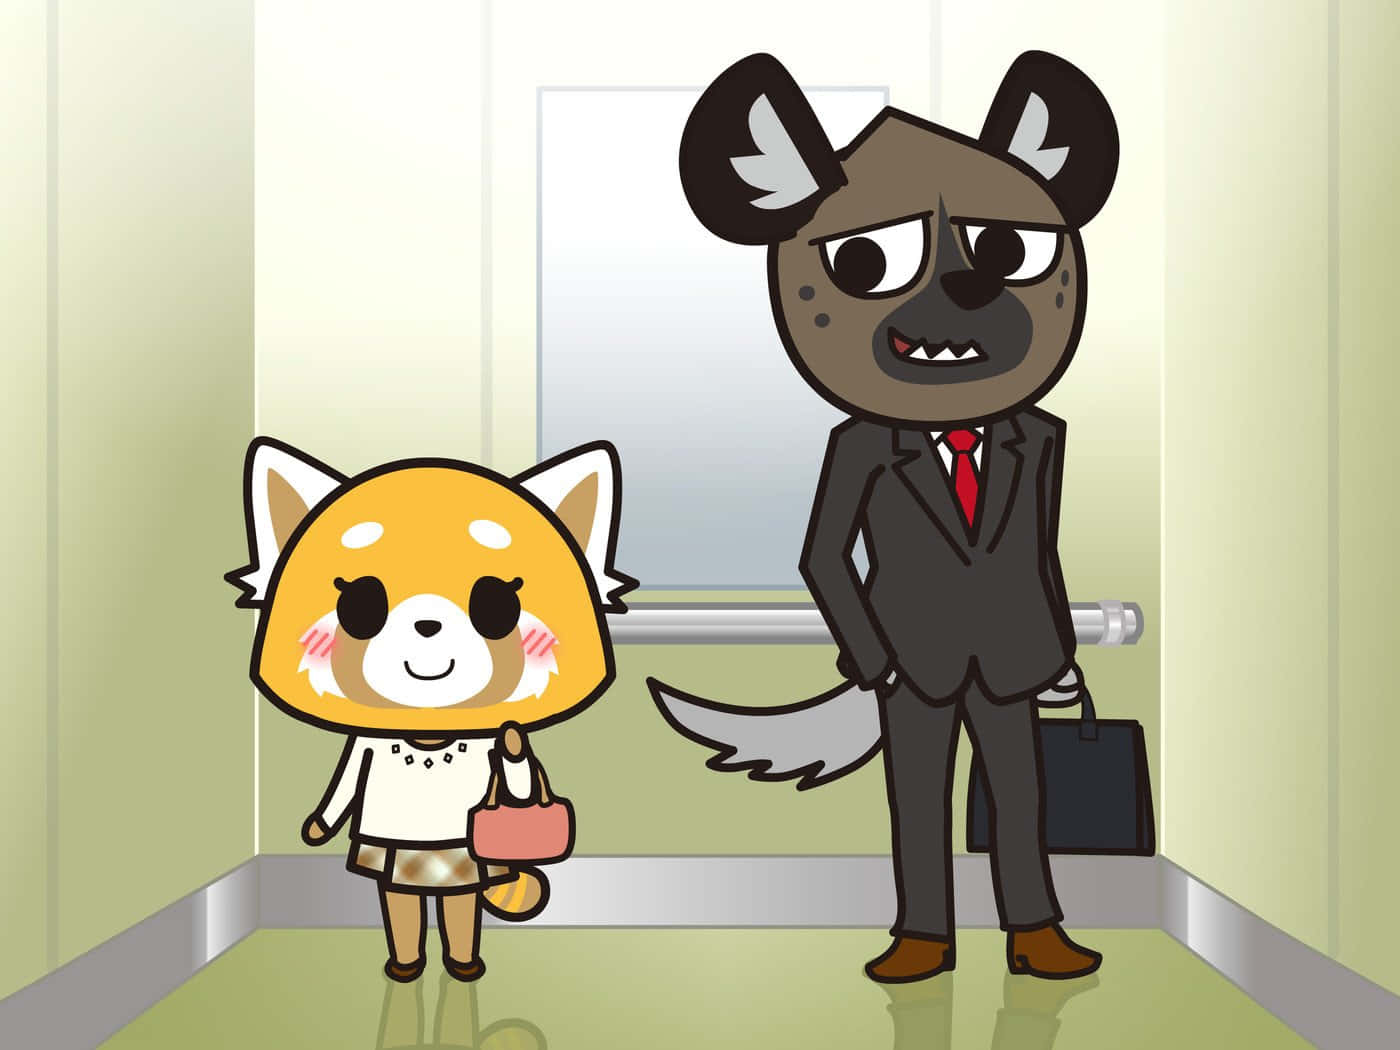 Aggretsuko – Screaming out her troubles through metal rock